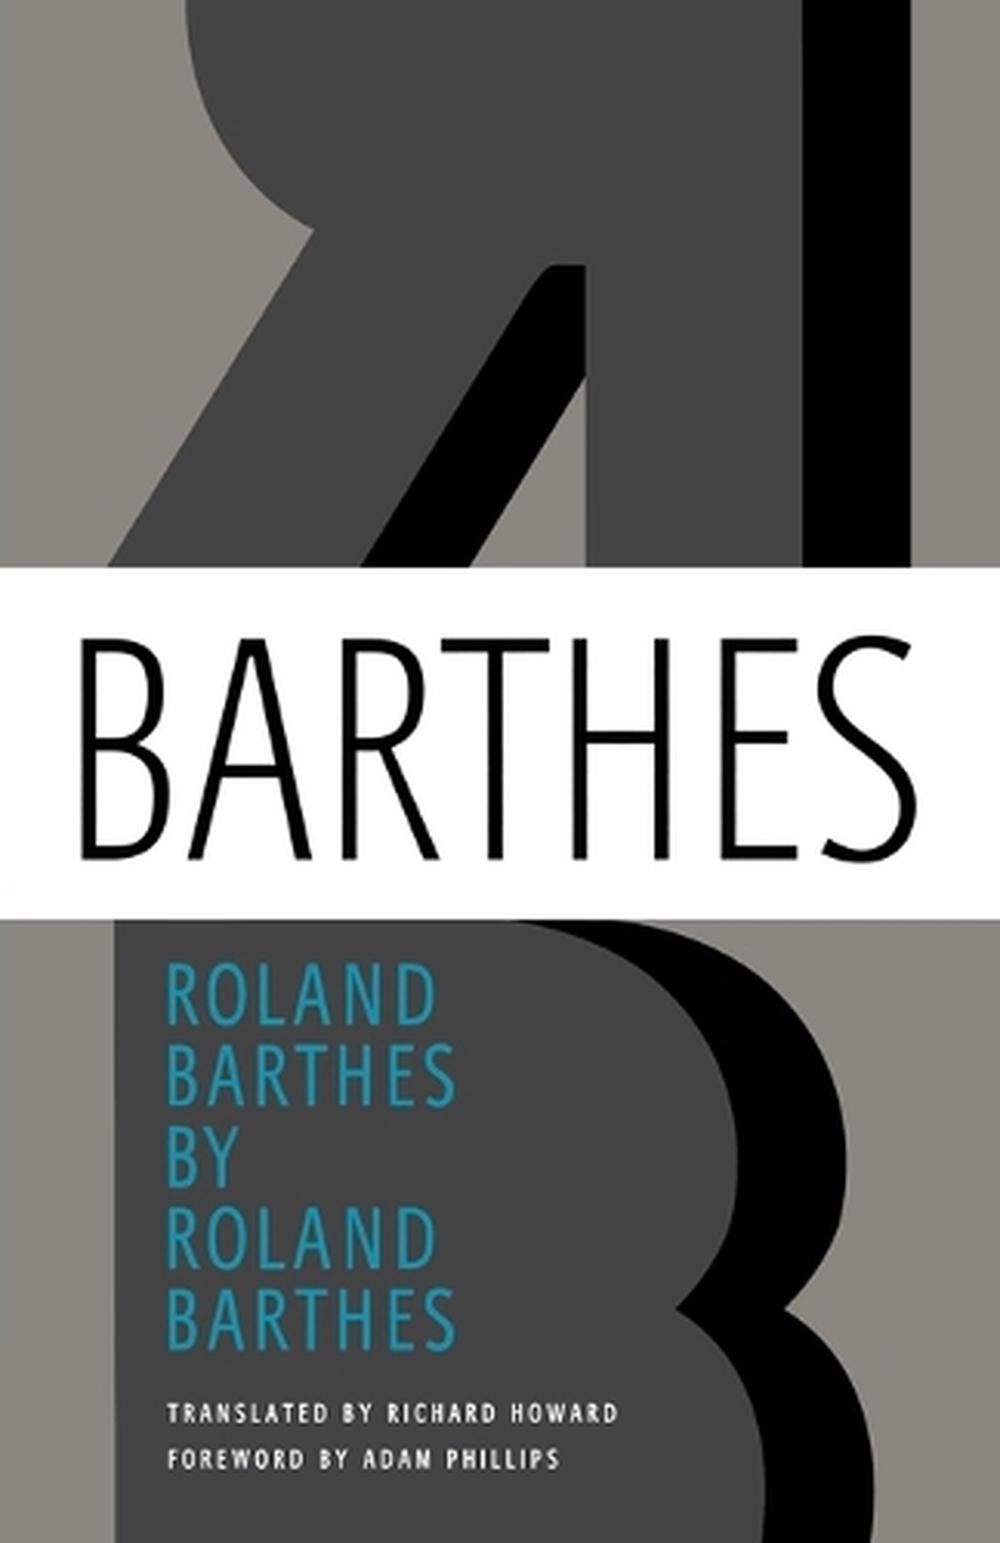 Roland Barthes by Roland Barthes, Paperback, 9780374251468 | Buy online ...